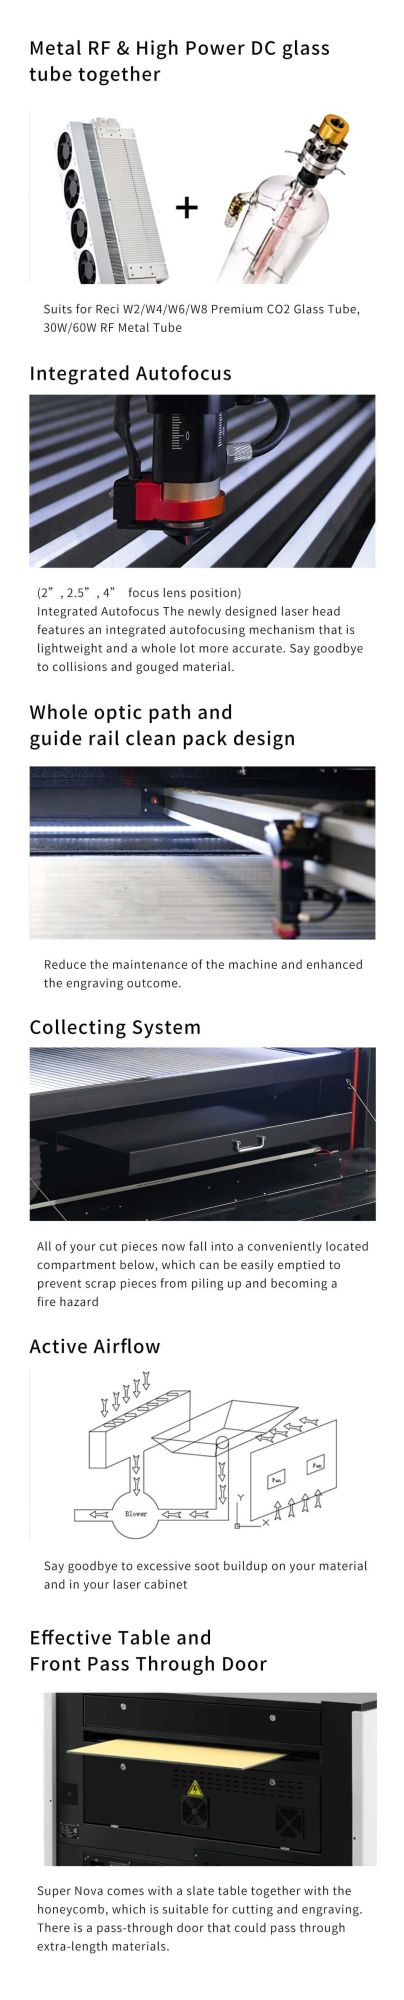 Aeon 1410 1014 100W 130W RF30W/60W Semi-Automatic Tube CO2 Laser Engraving Cutting Machine for Advertising/Leather/Printing and Packaging/Craft/Wood Industry